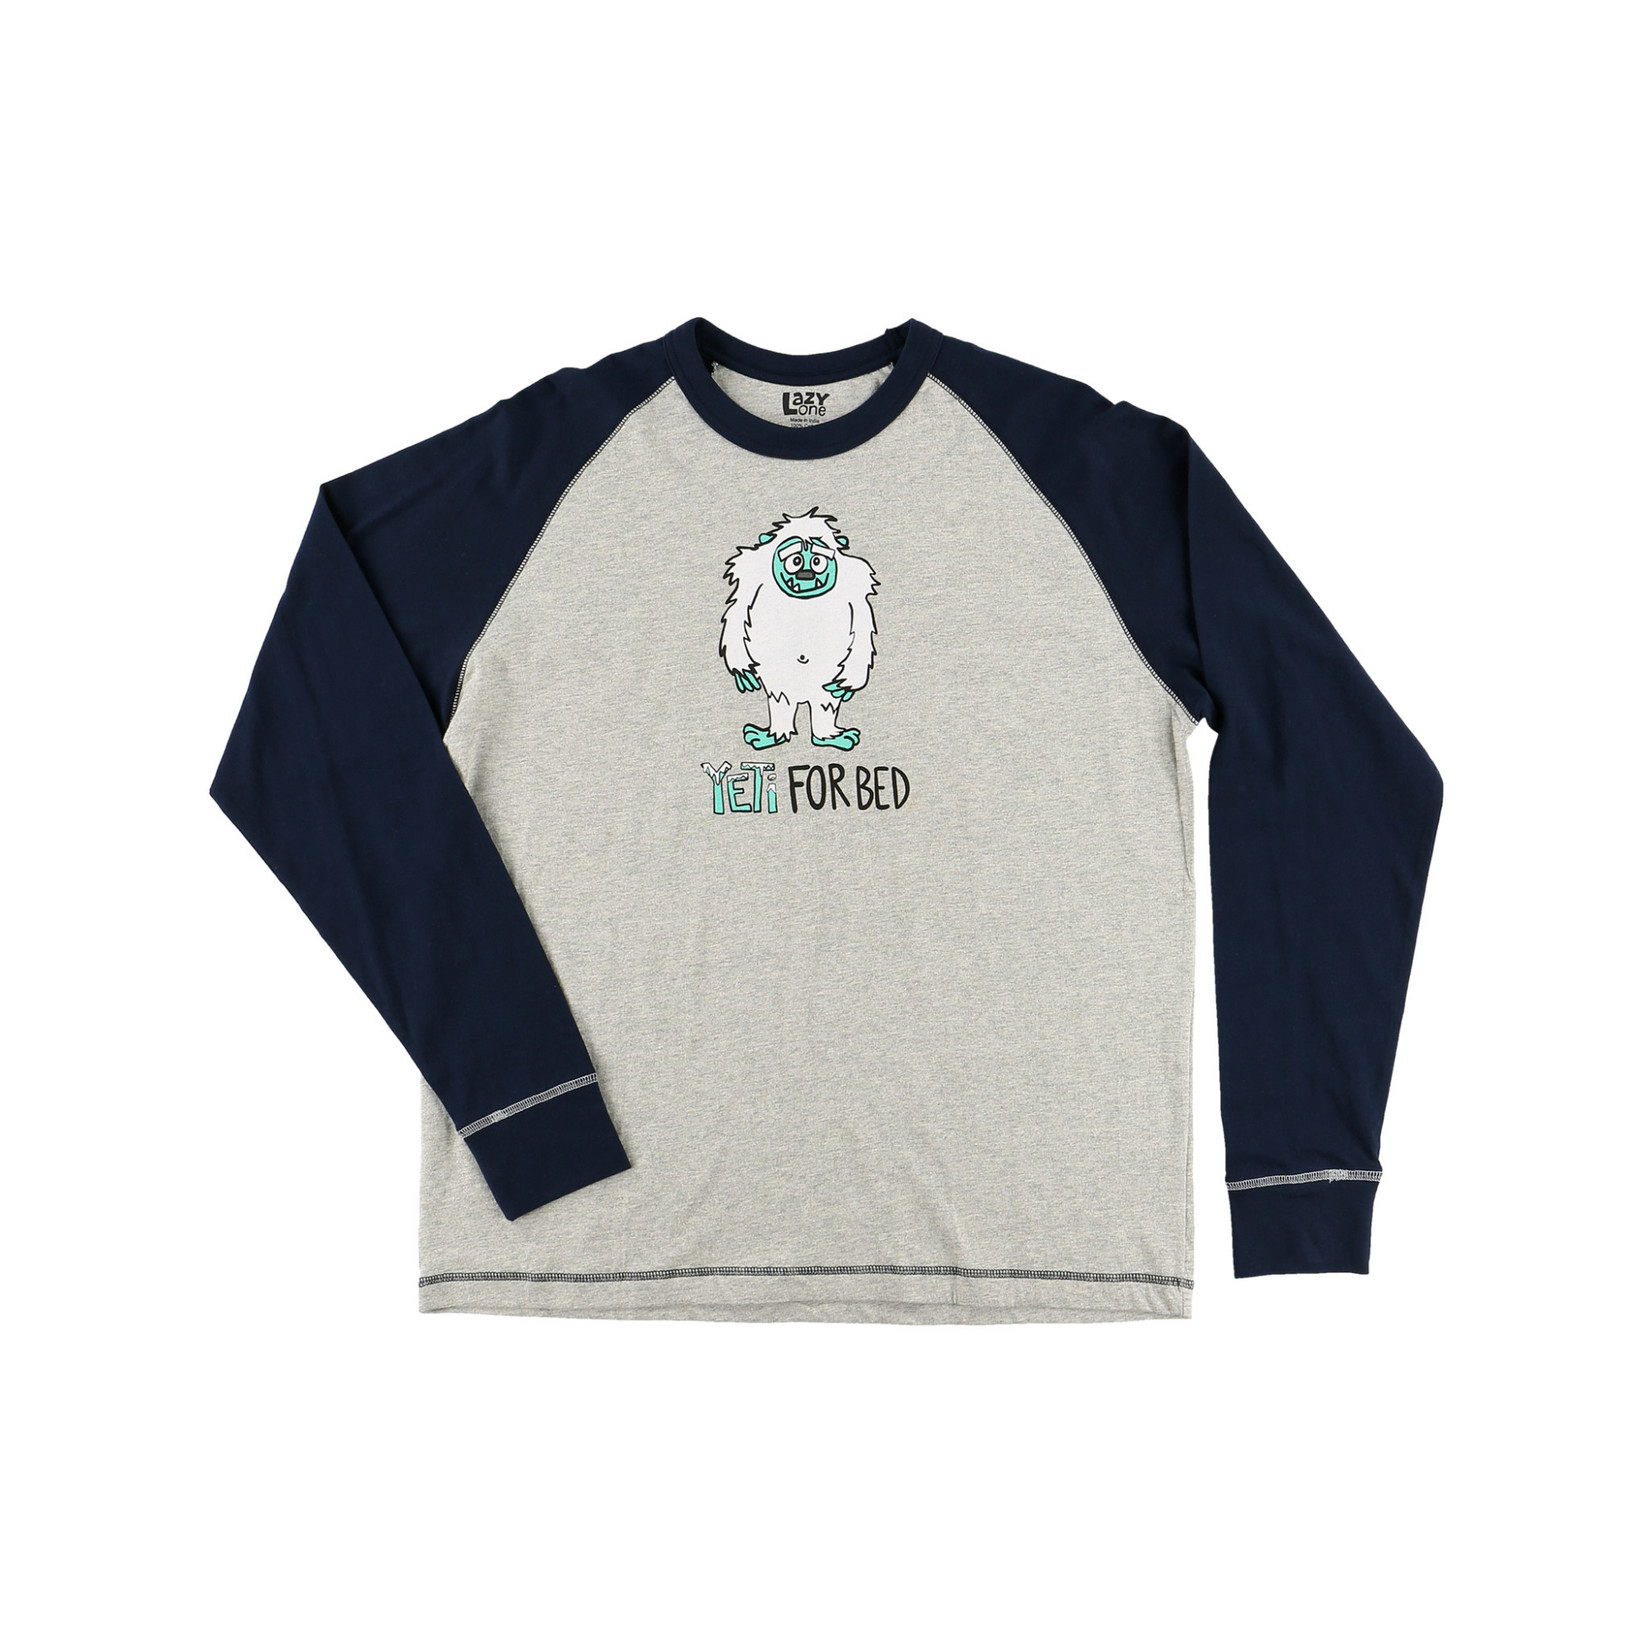 Lazy One Yeti For Bed LS PJ Tee